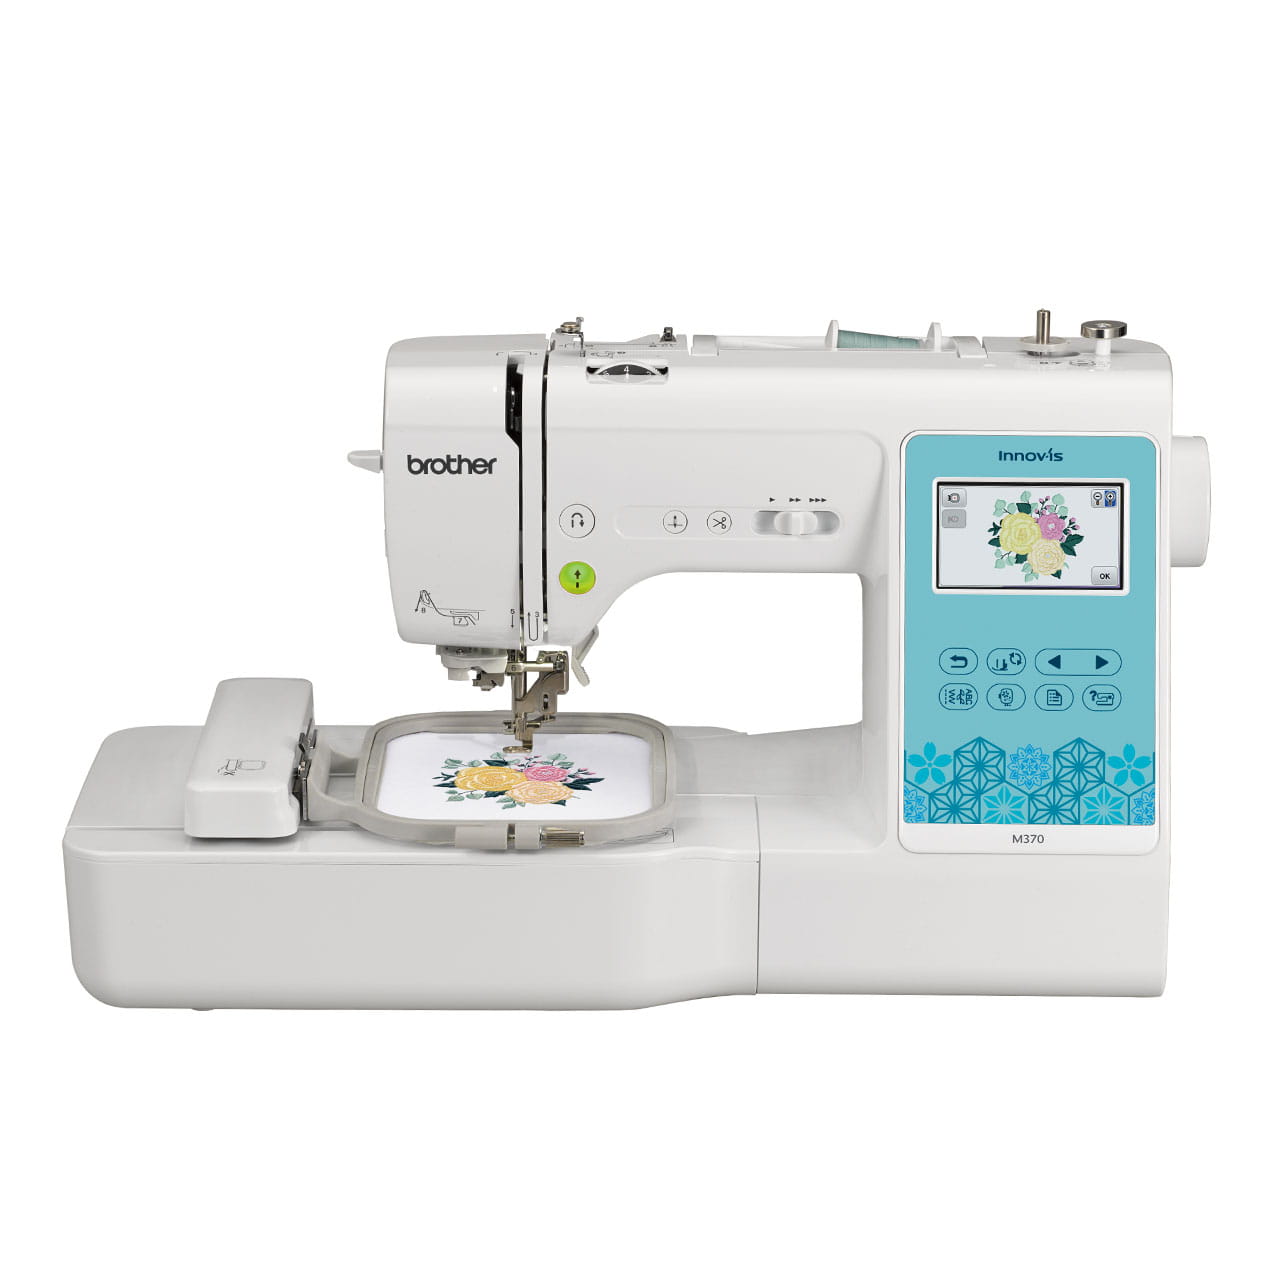 Brother Innov-is M370 Sewing, Embroidery & Quilting Machine Front View1